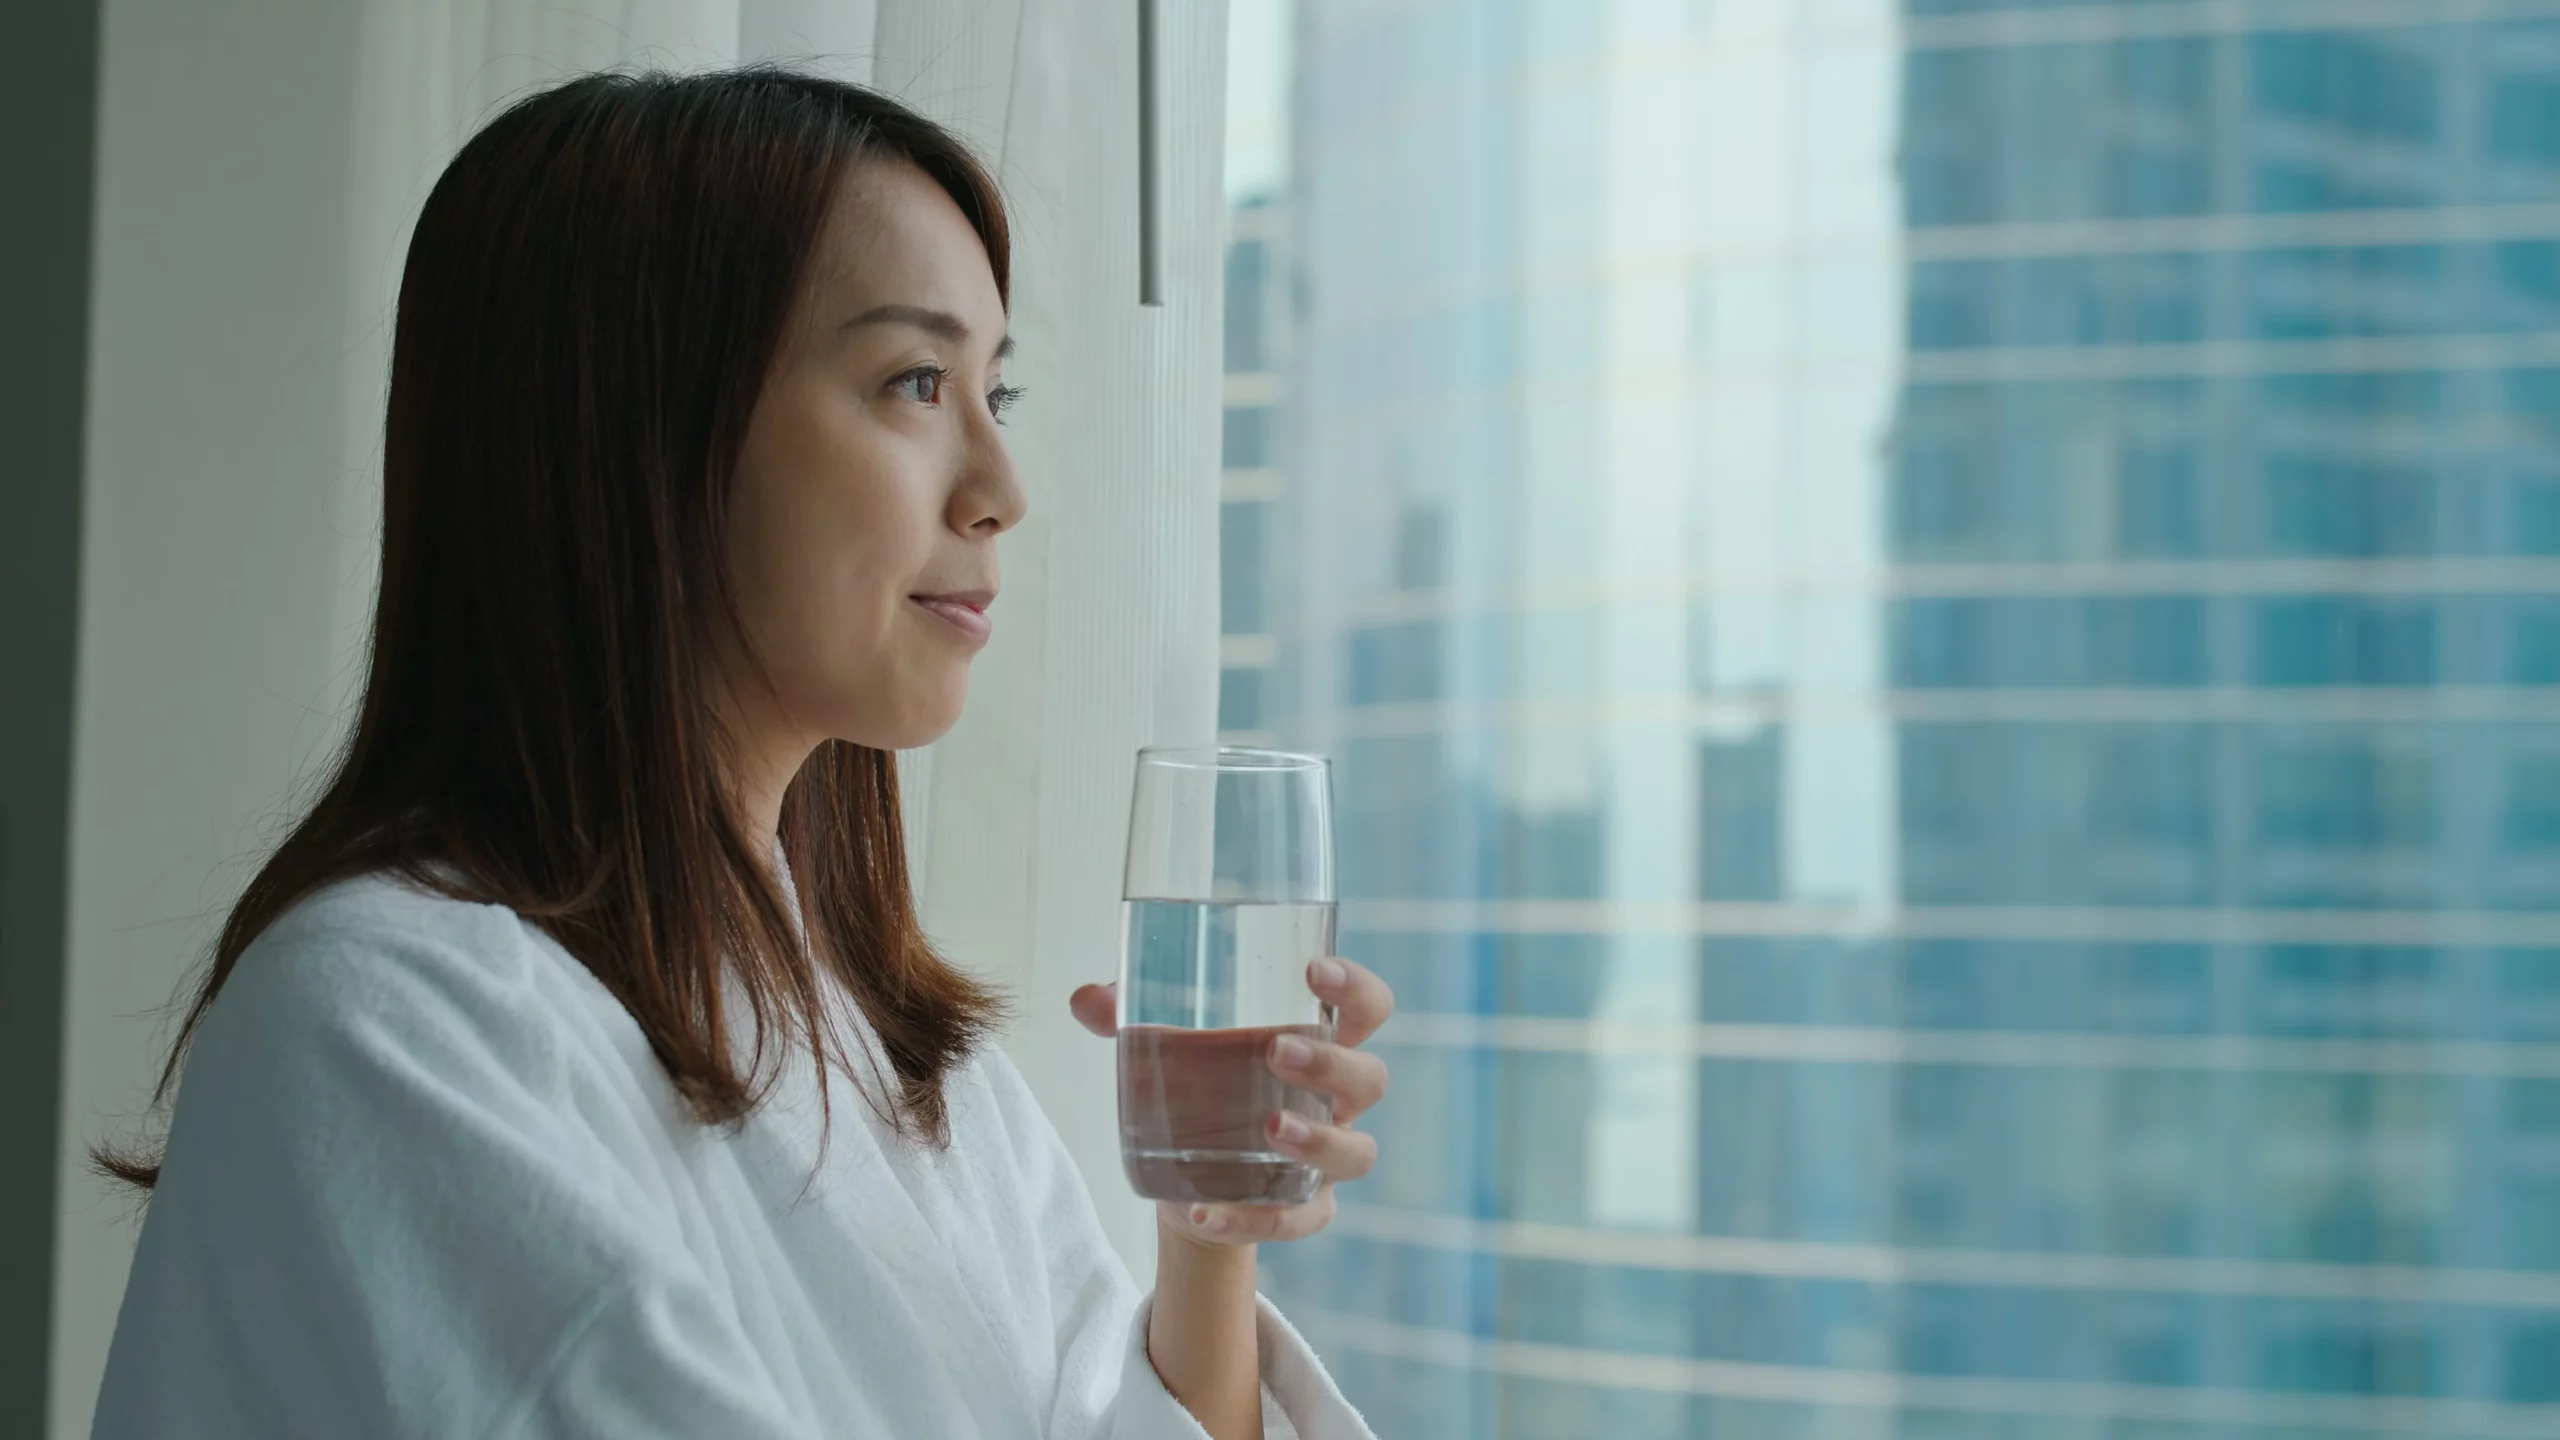 Woman looking out the window and holding glass of water.